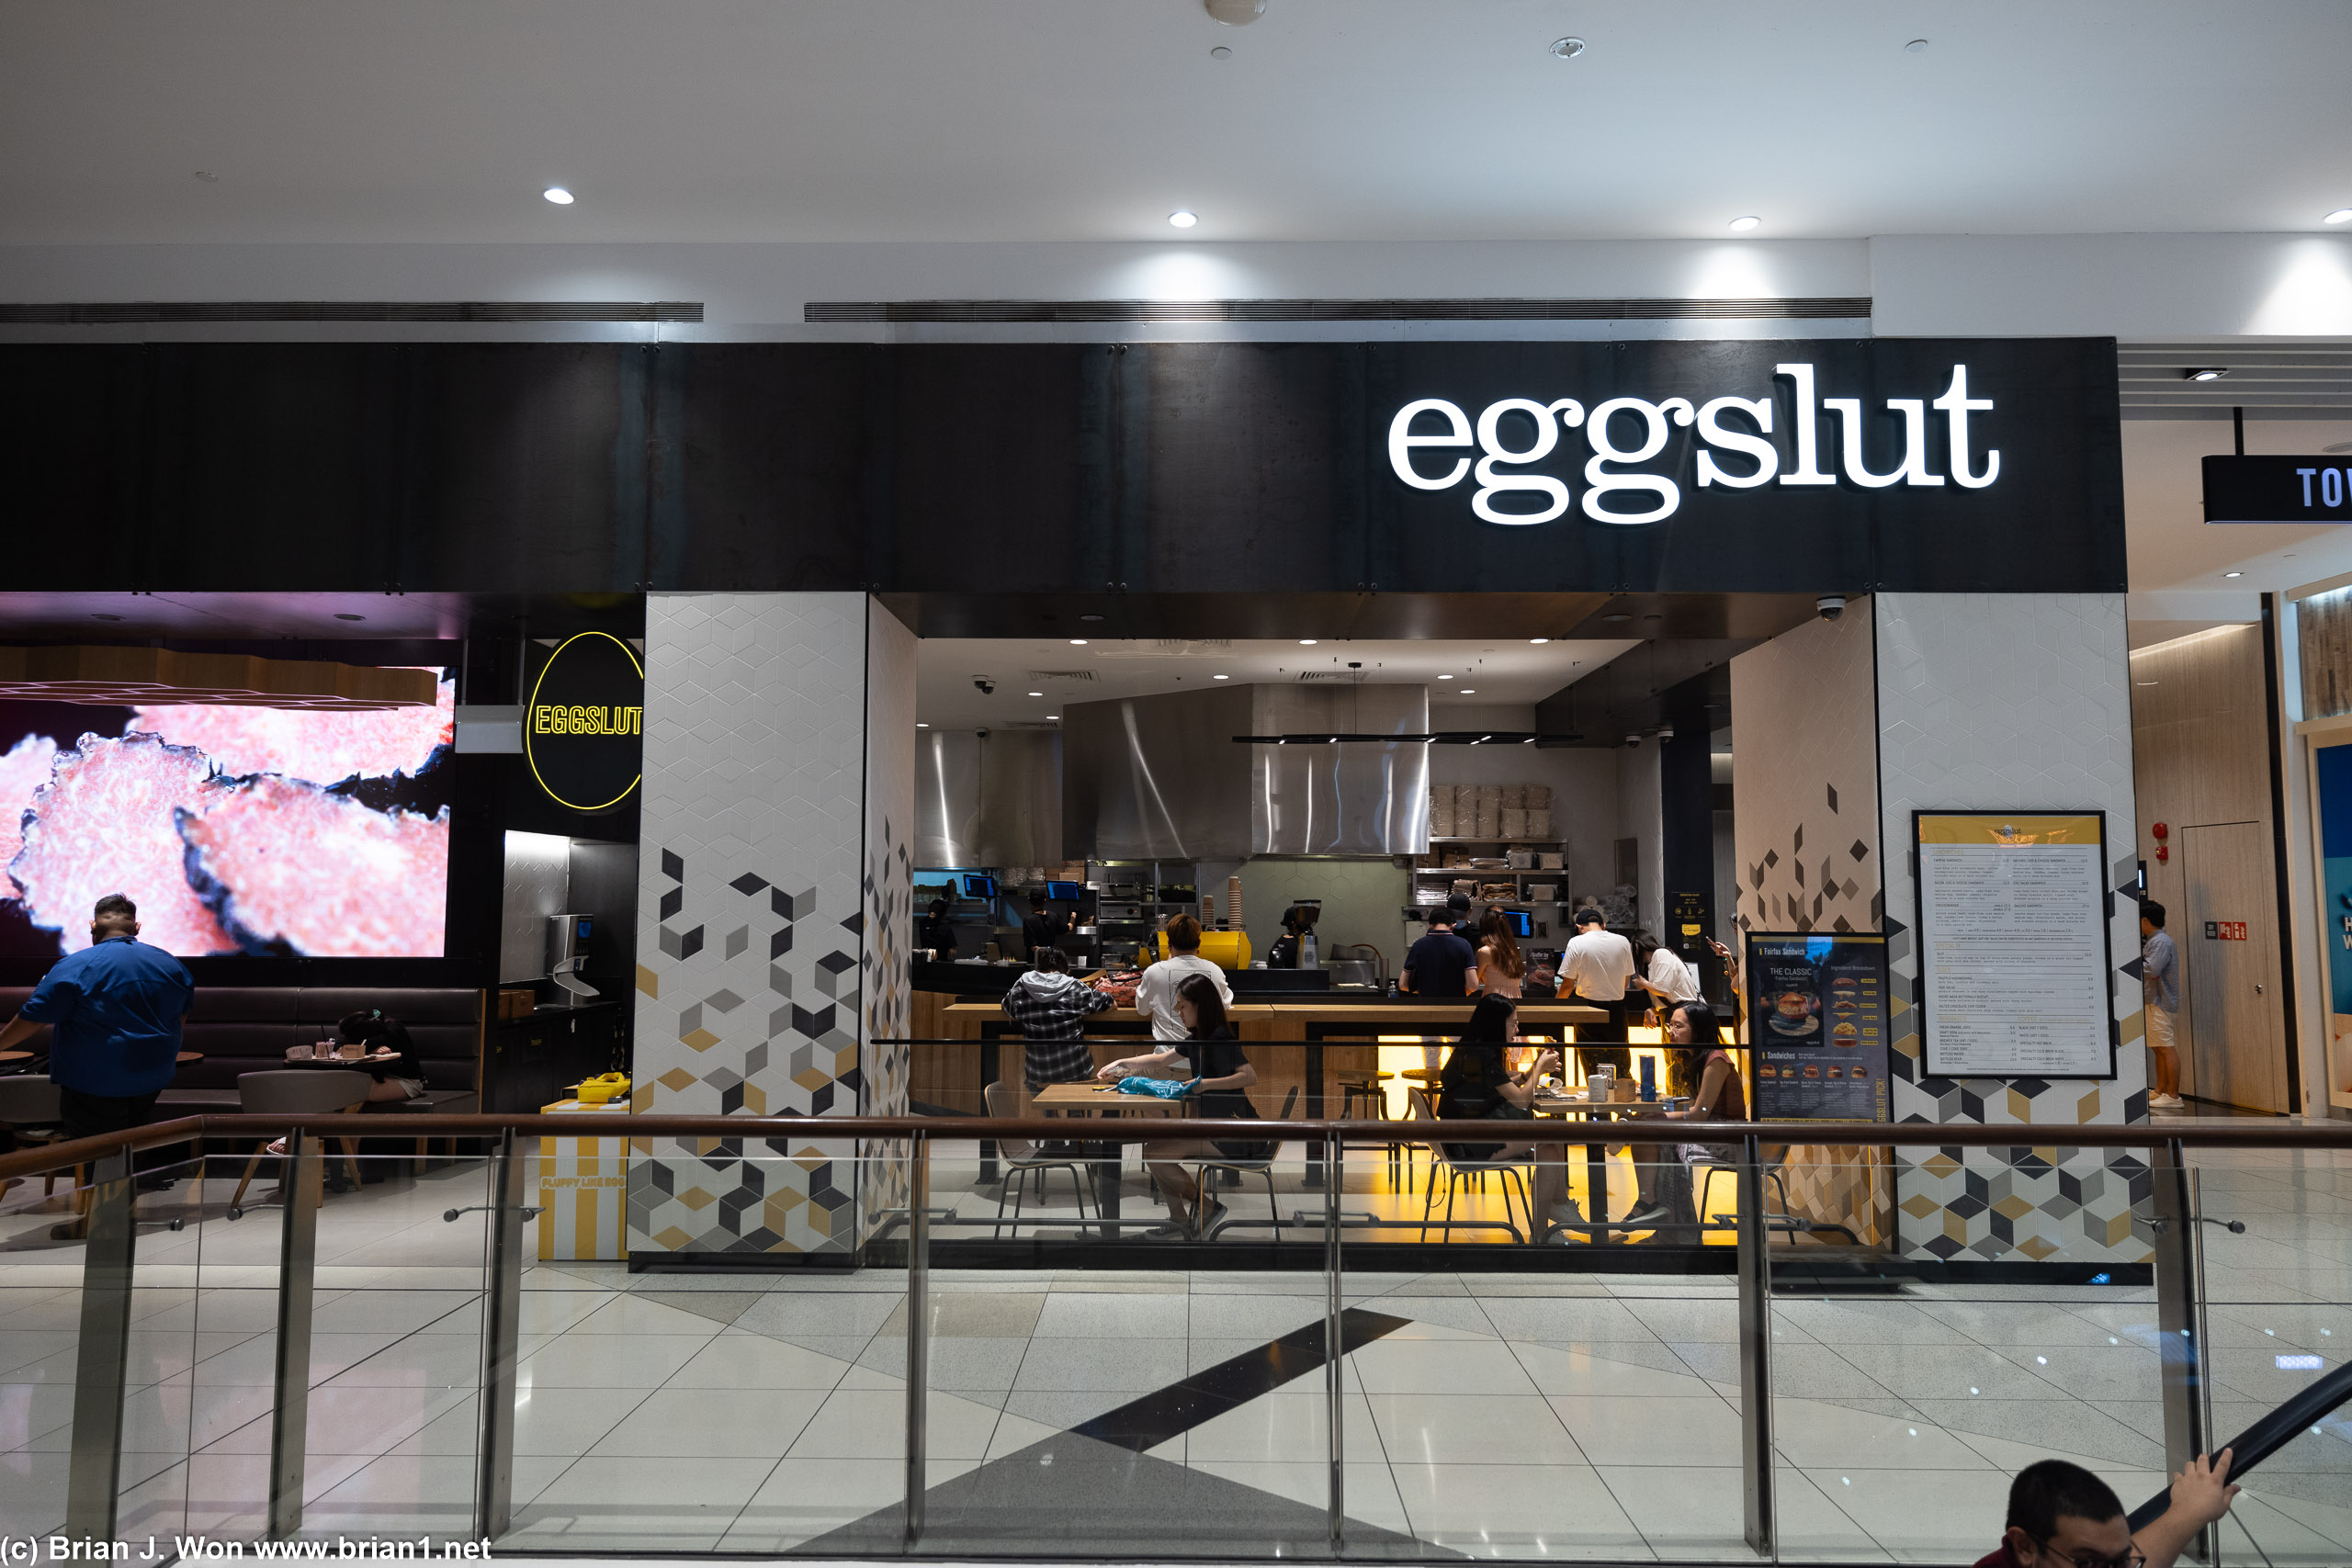 There is Eggslut everywhere!